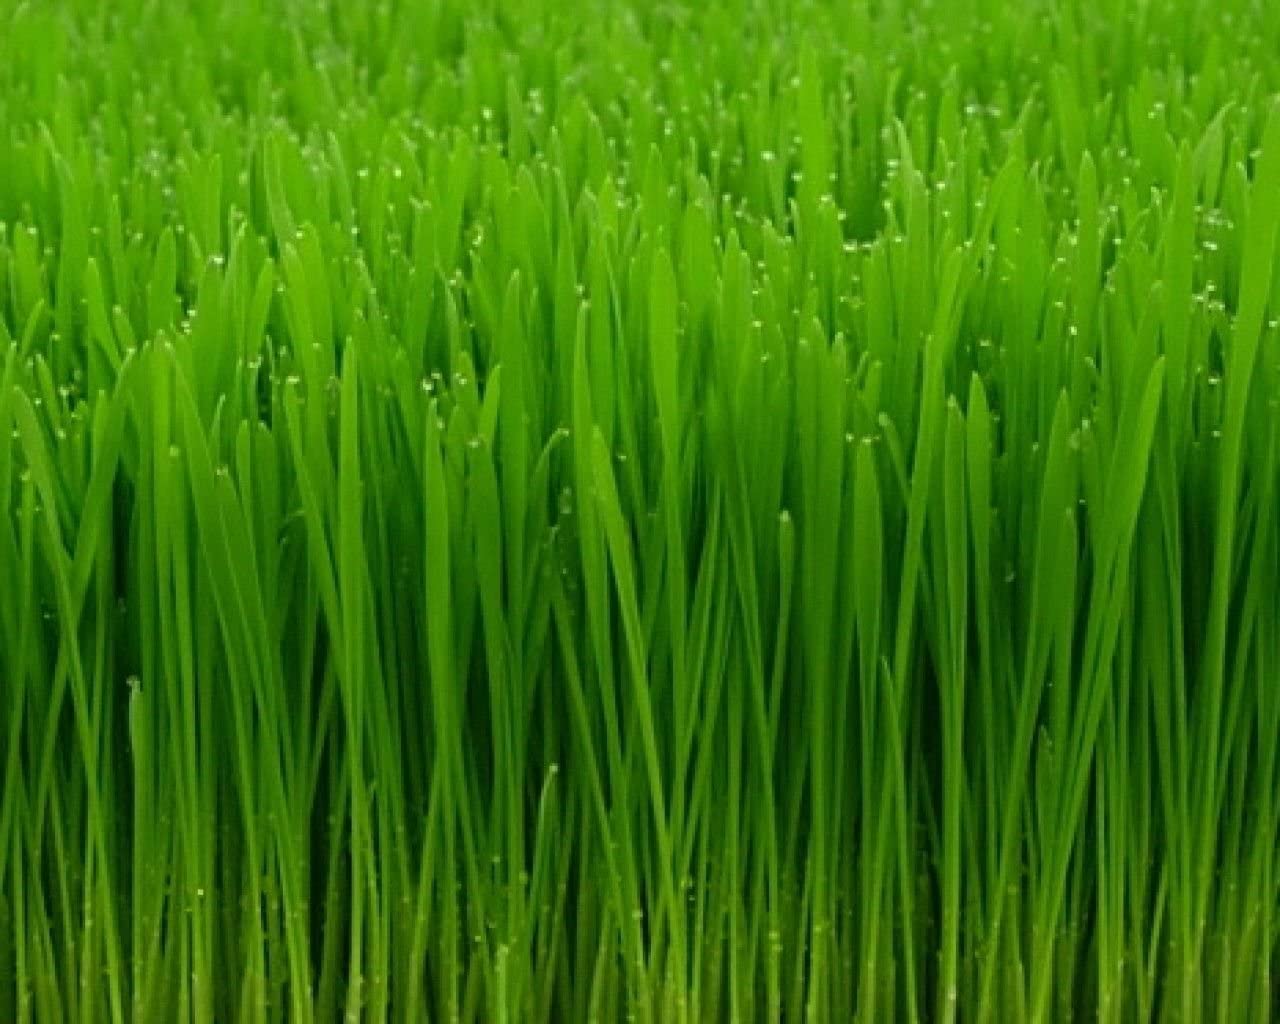 Wheat or oat grass